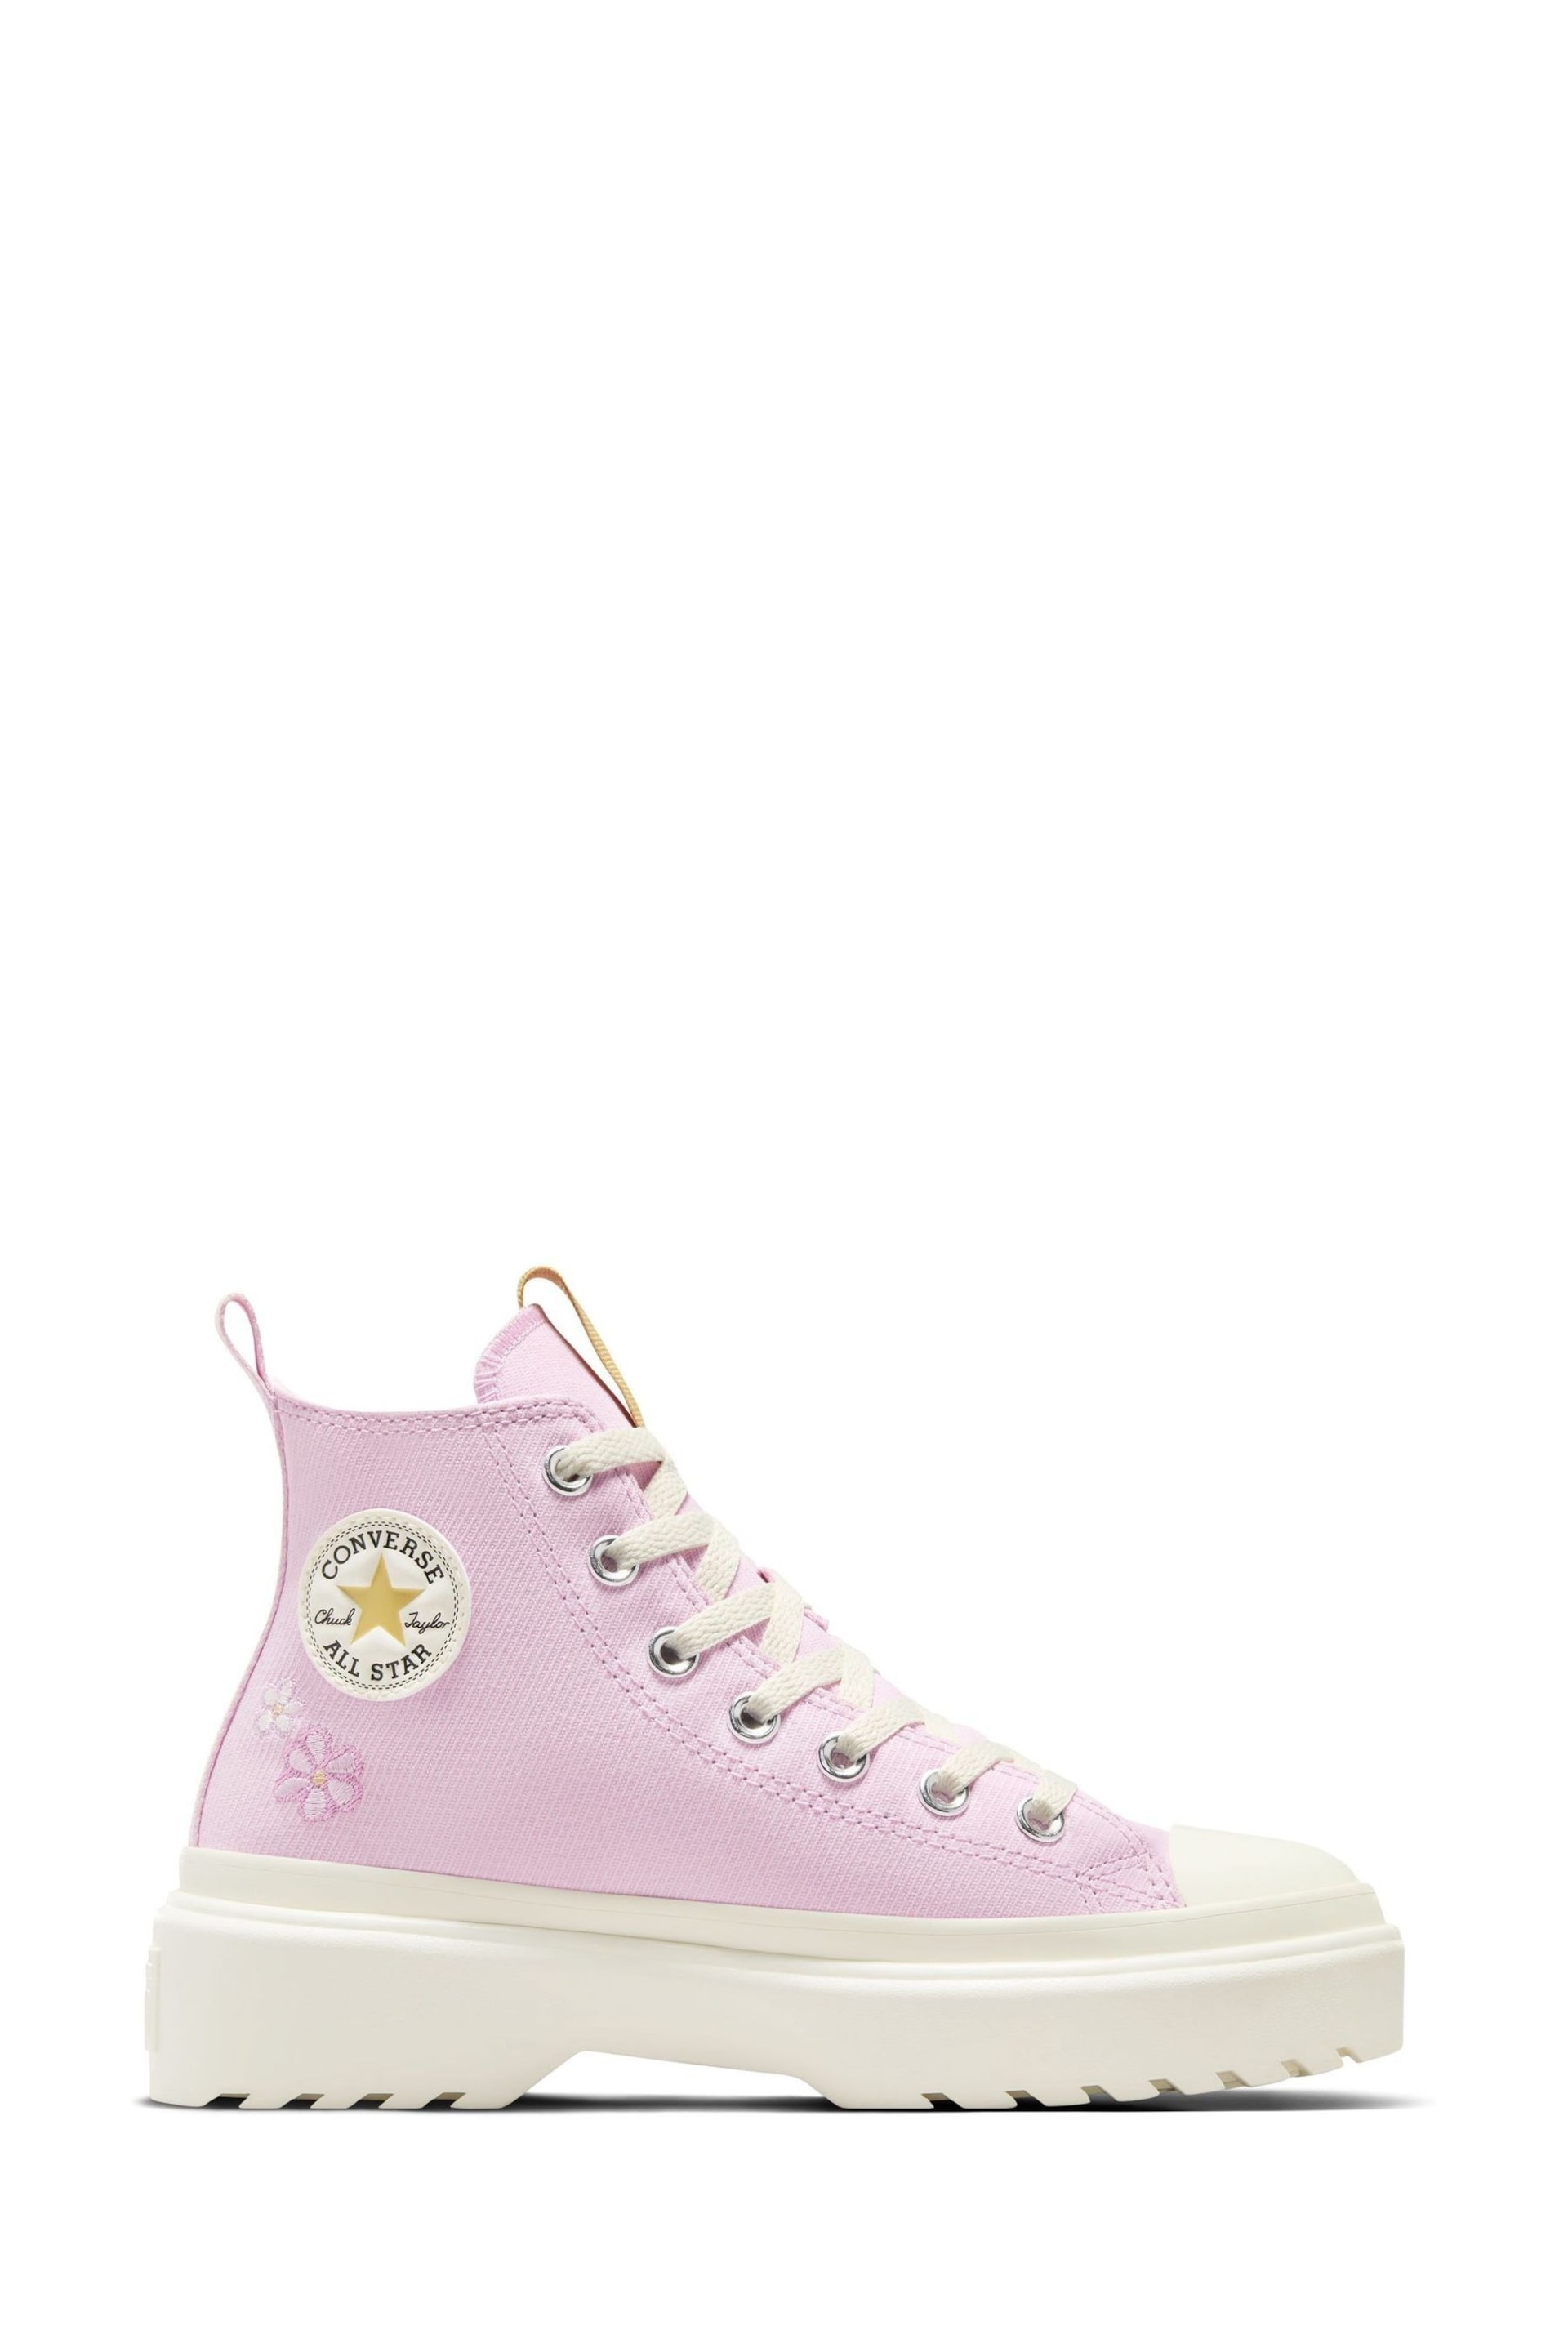 Converse Purple Chuck Taylor Flower Embroidered Lugged Lift Junior Trainers - Image 1 of 12